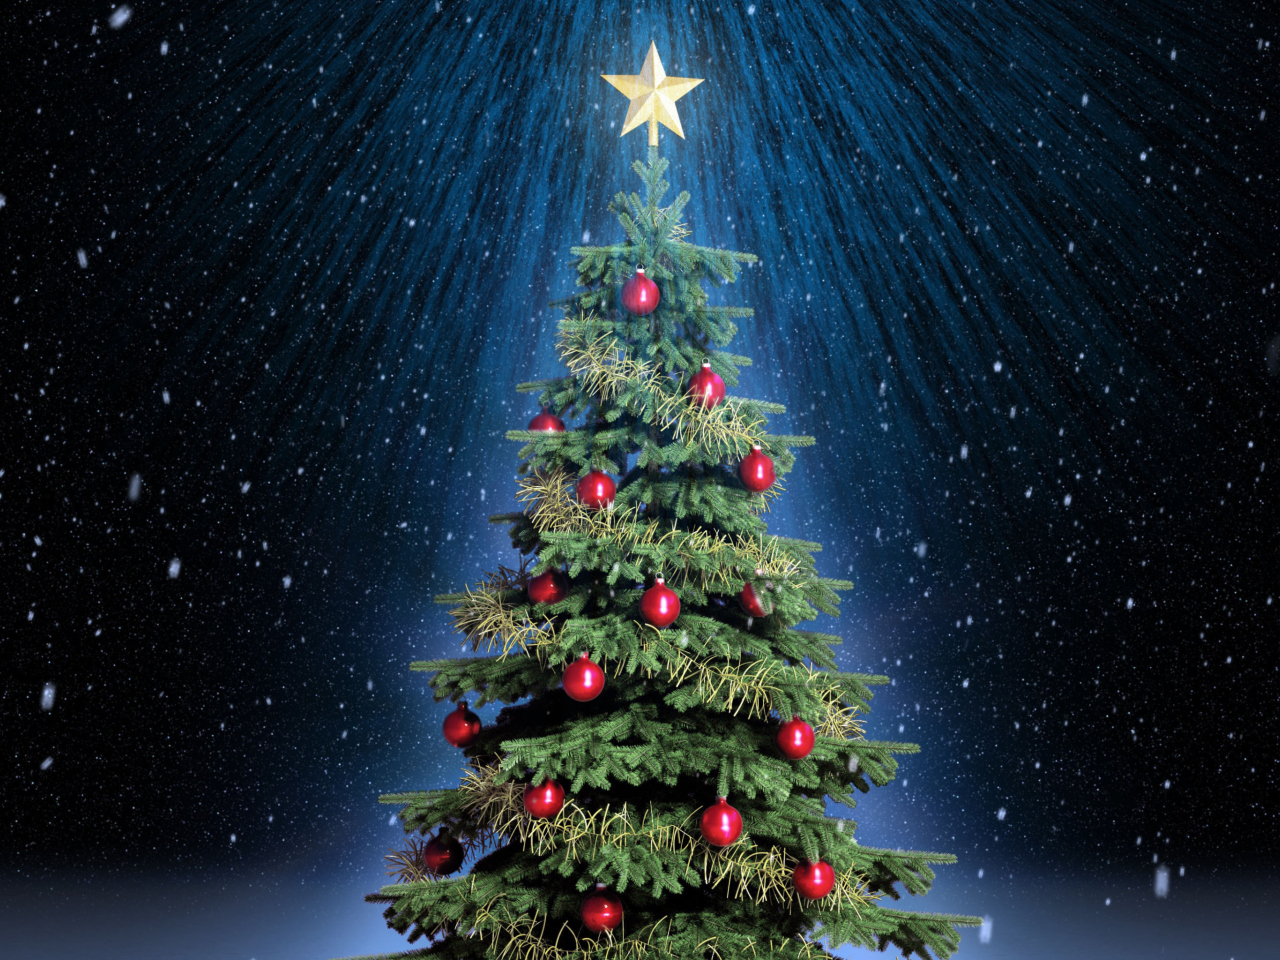 Classic Christmas Tree With Star On Top wallpaper 1280x960